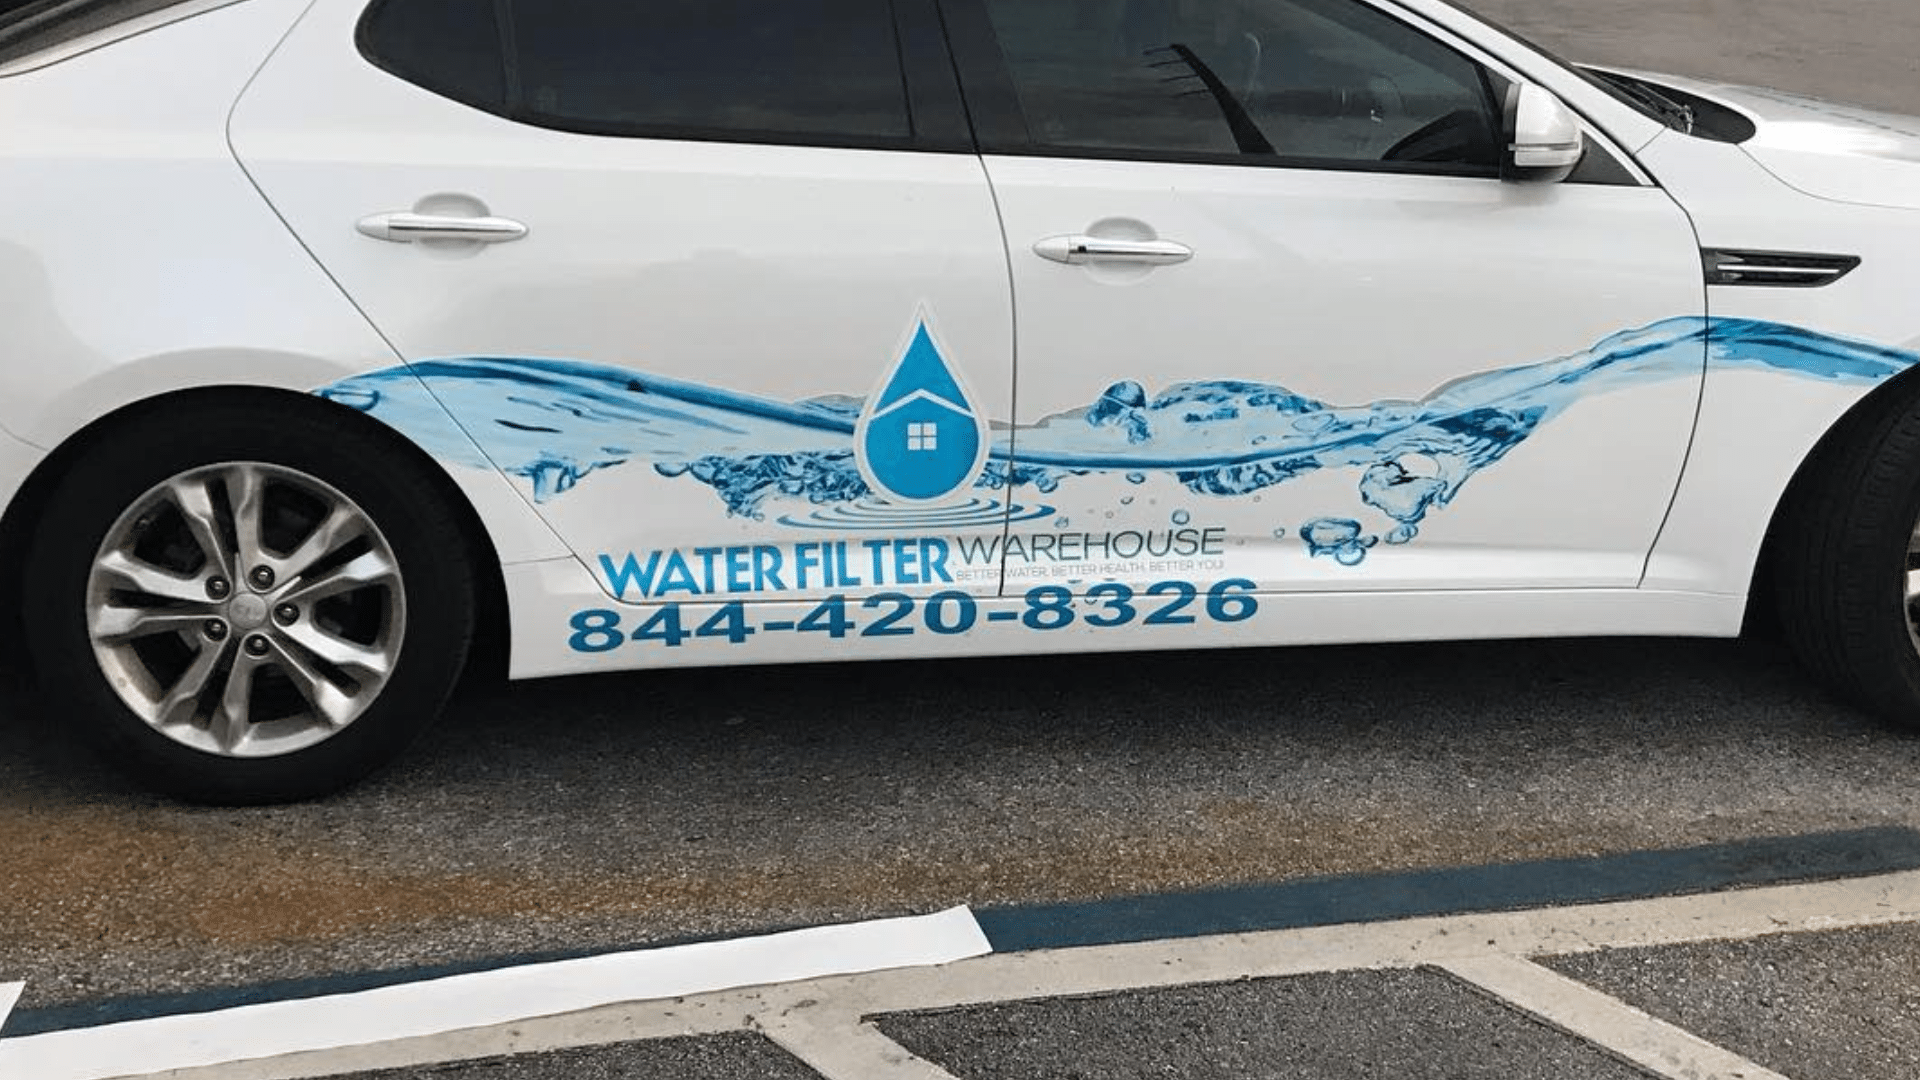 Water Filter Warehouse Car Wrapped